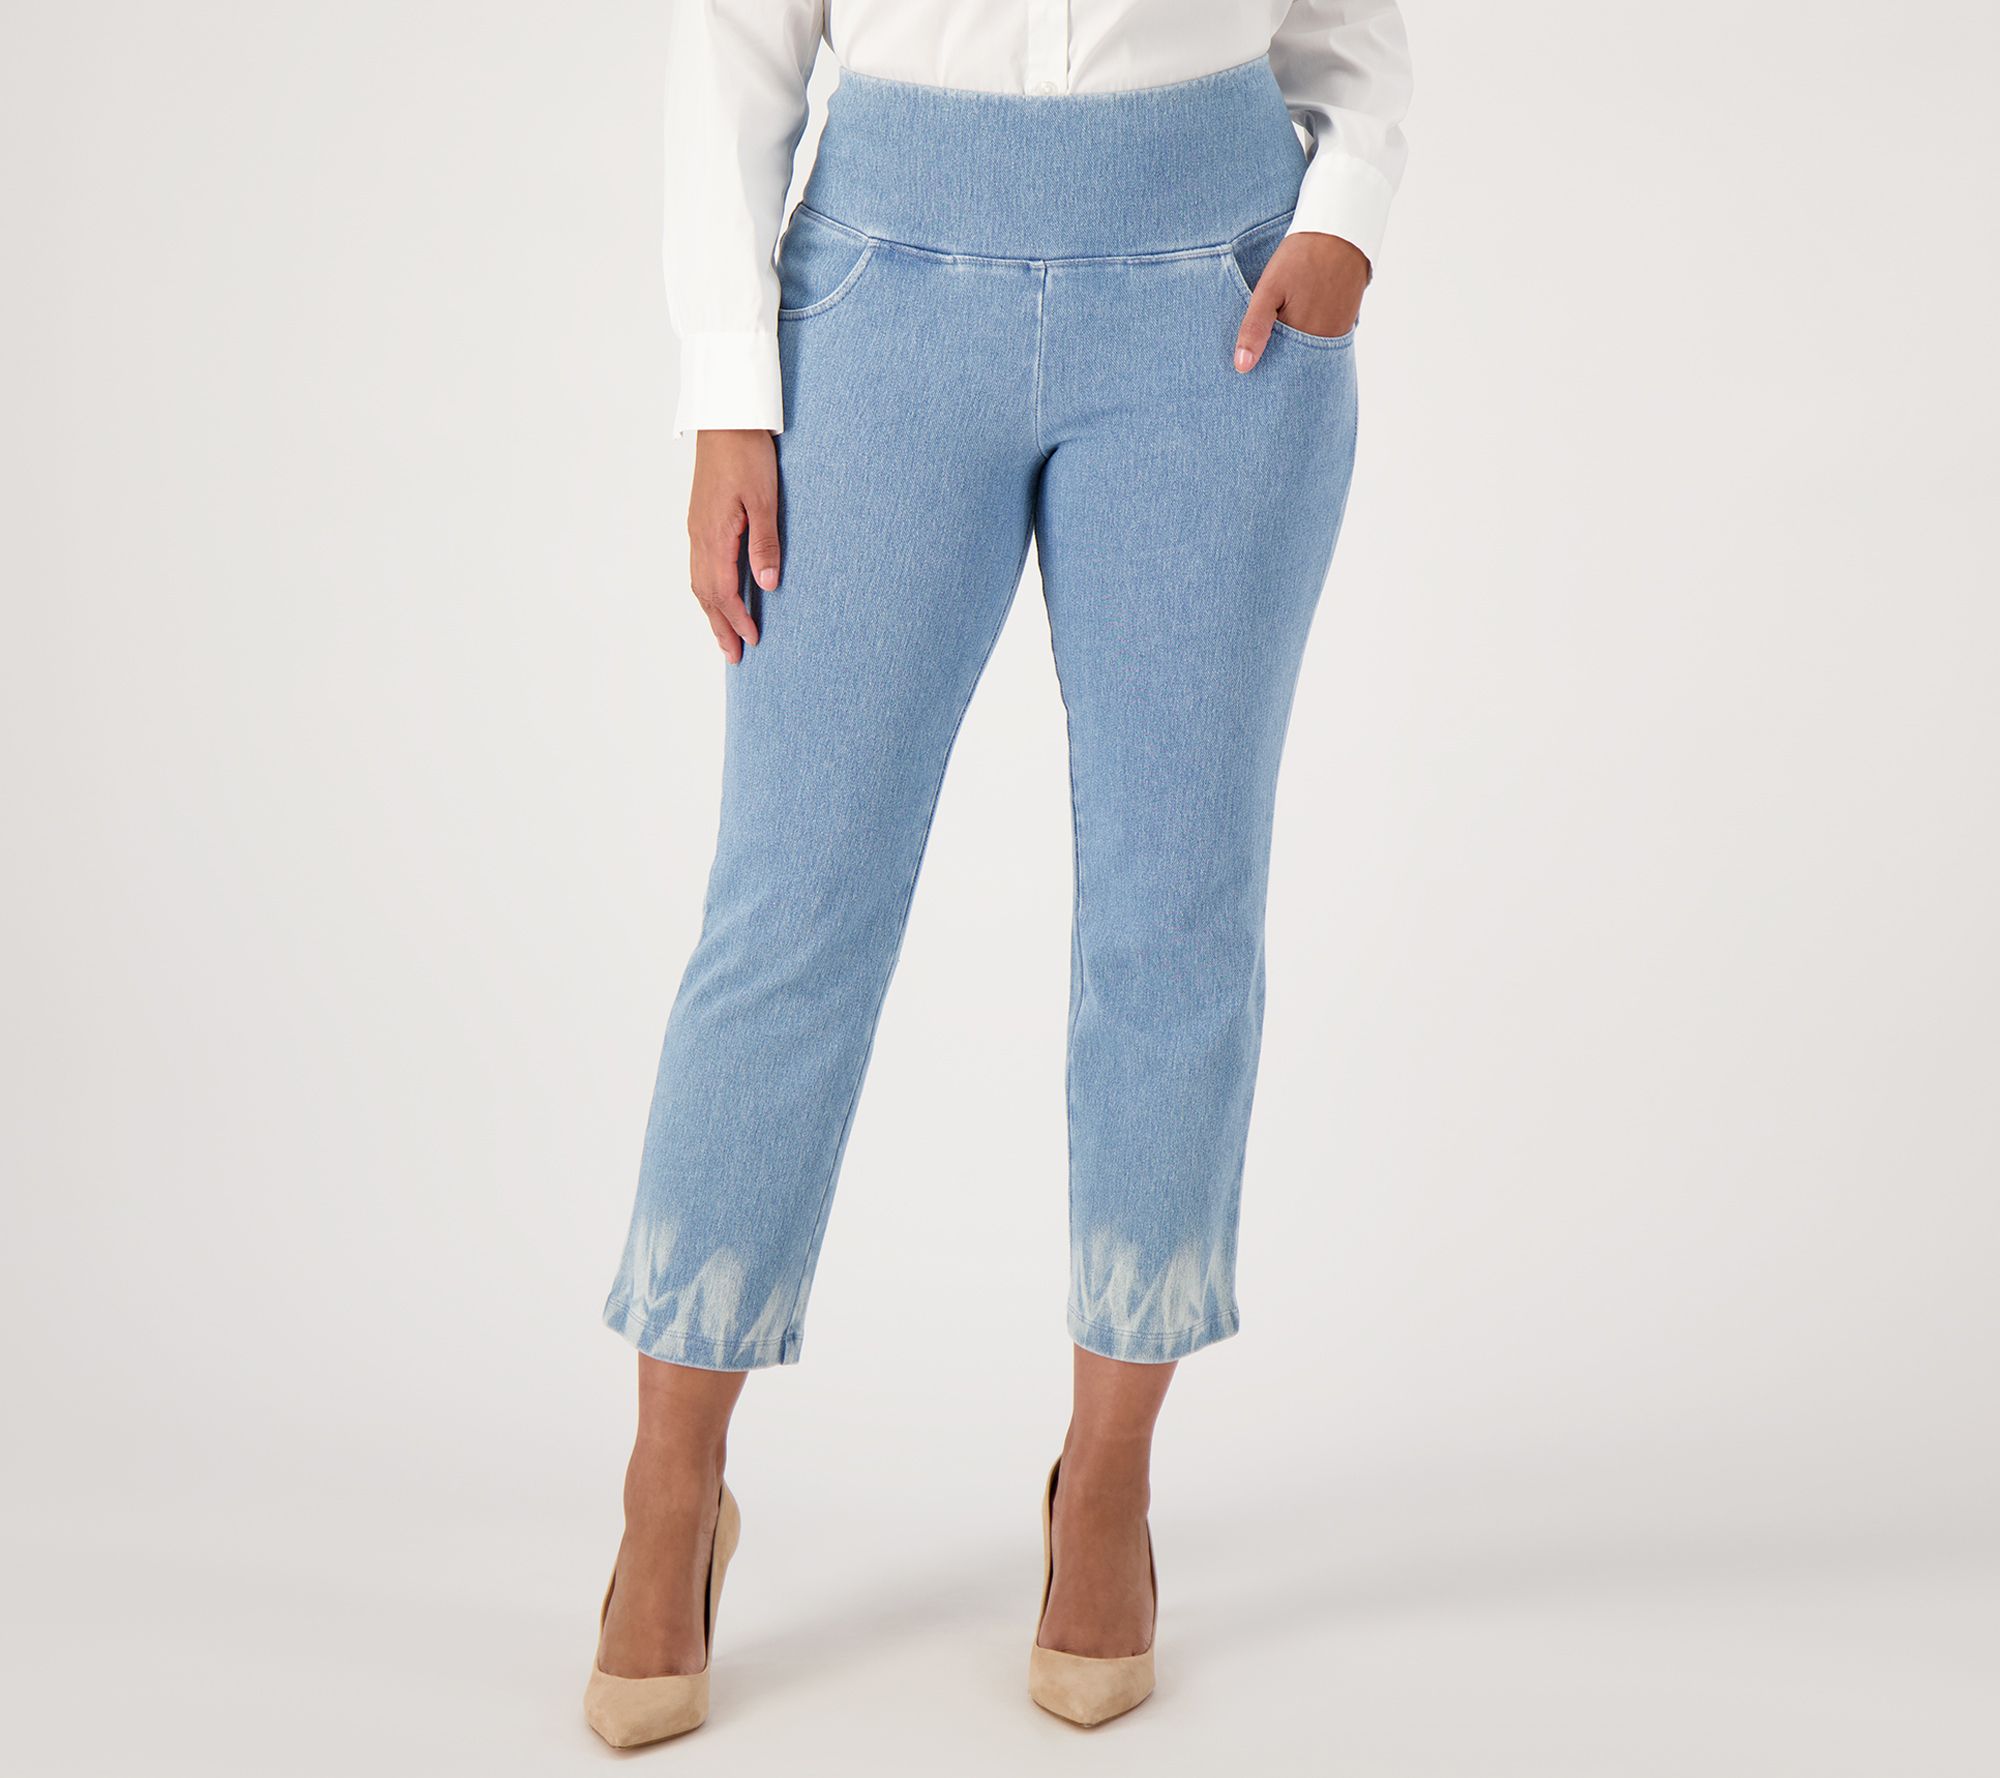 Women with Control Tall Prime Stretch Crop Denim Pants 